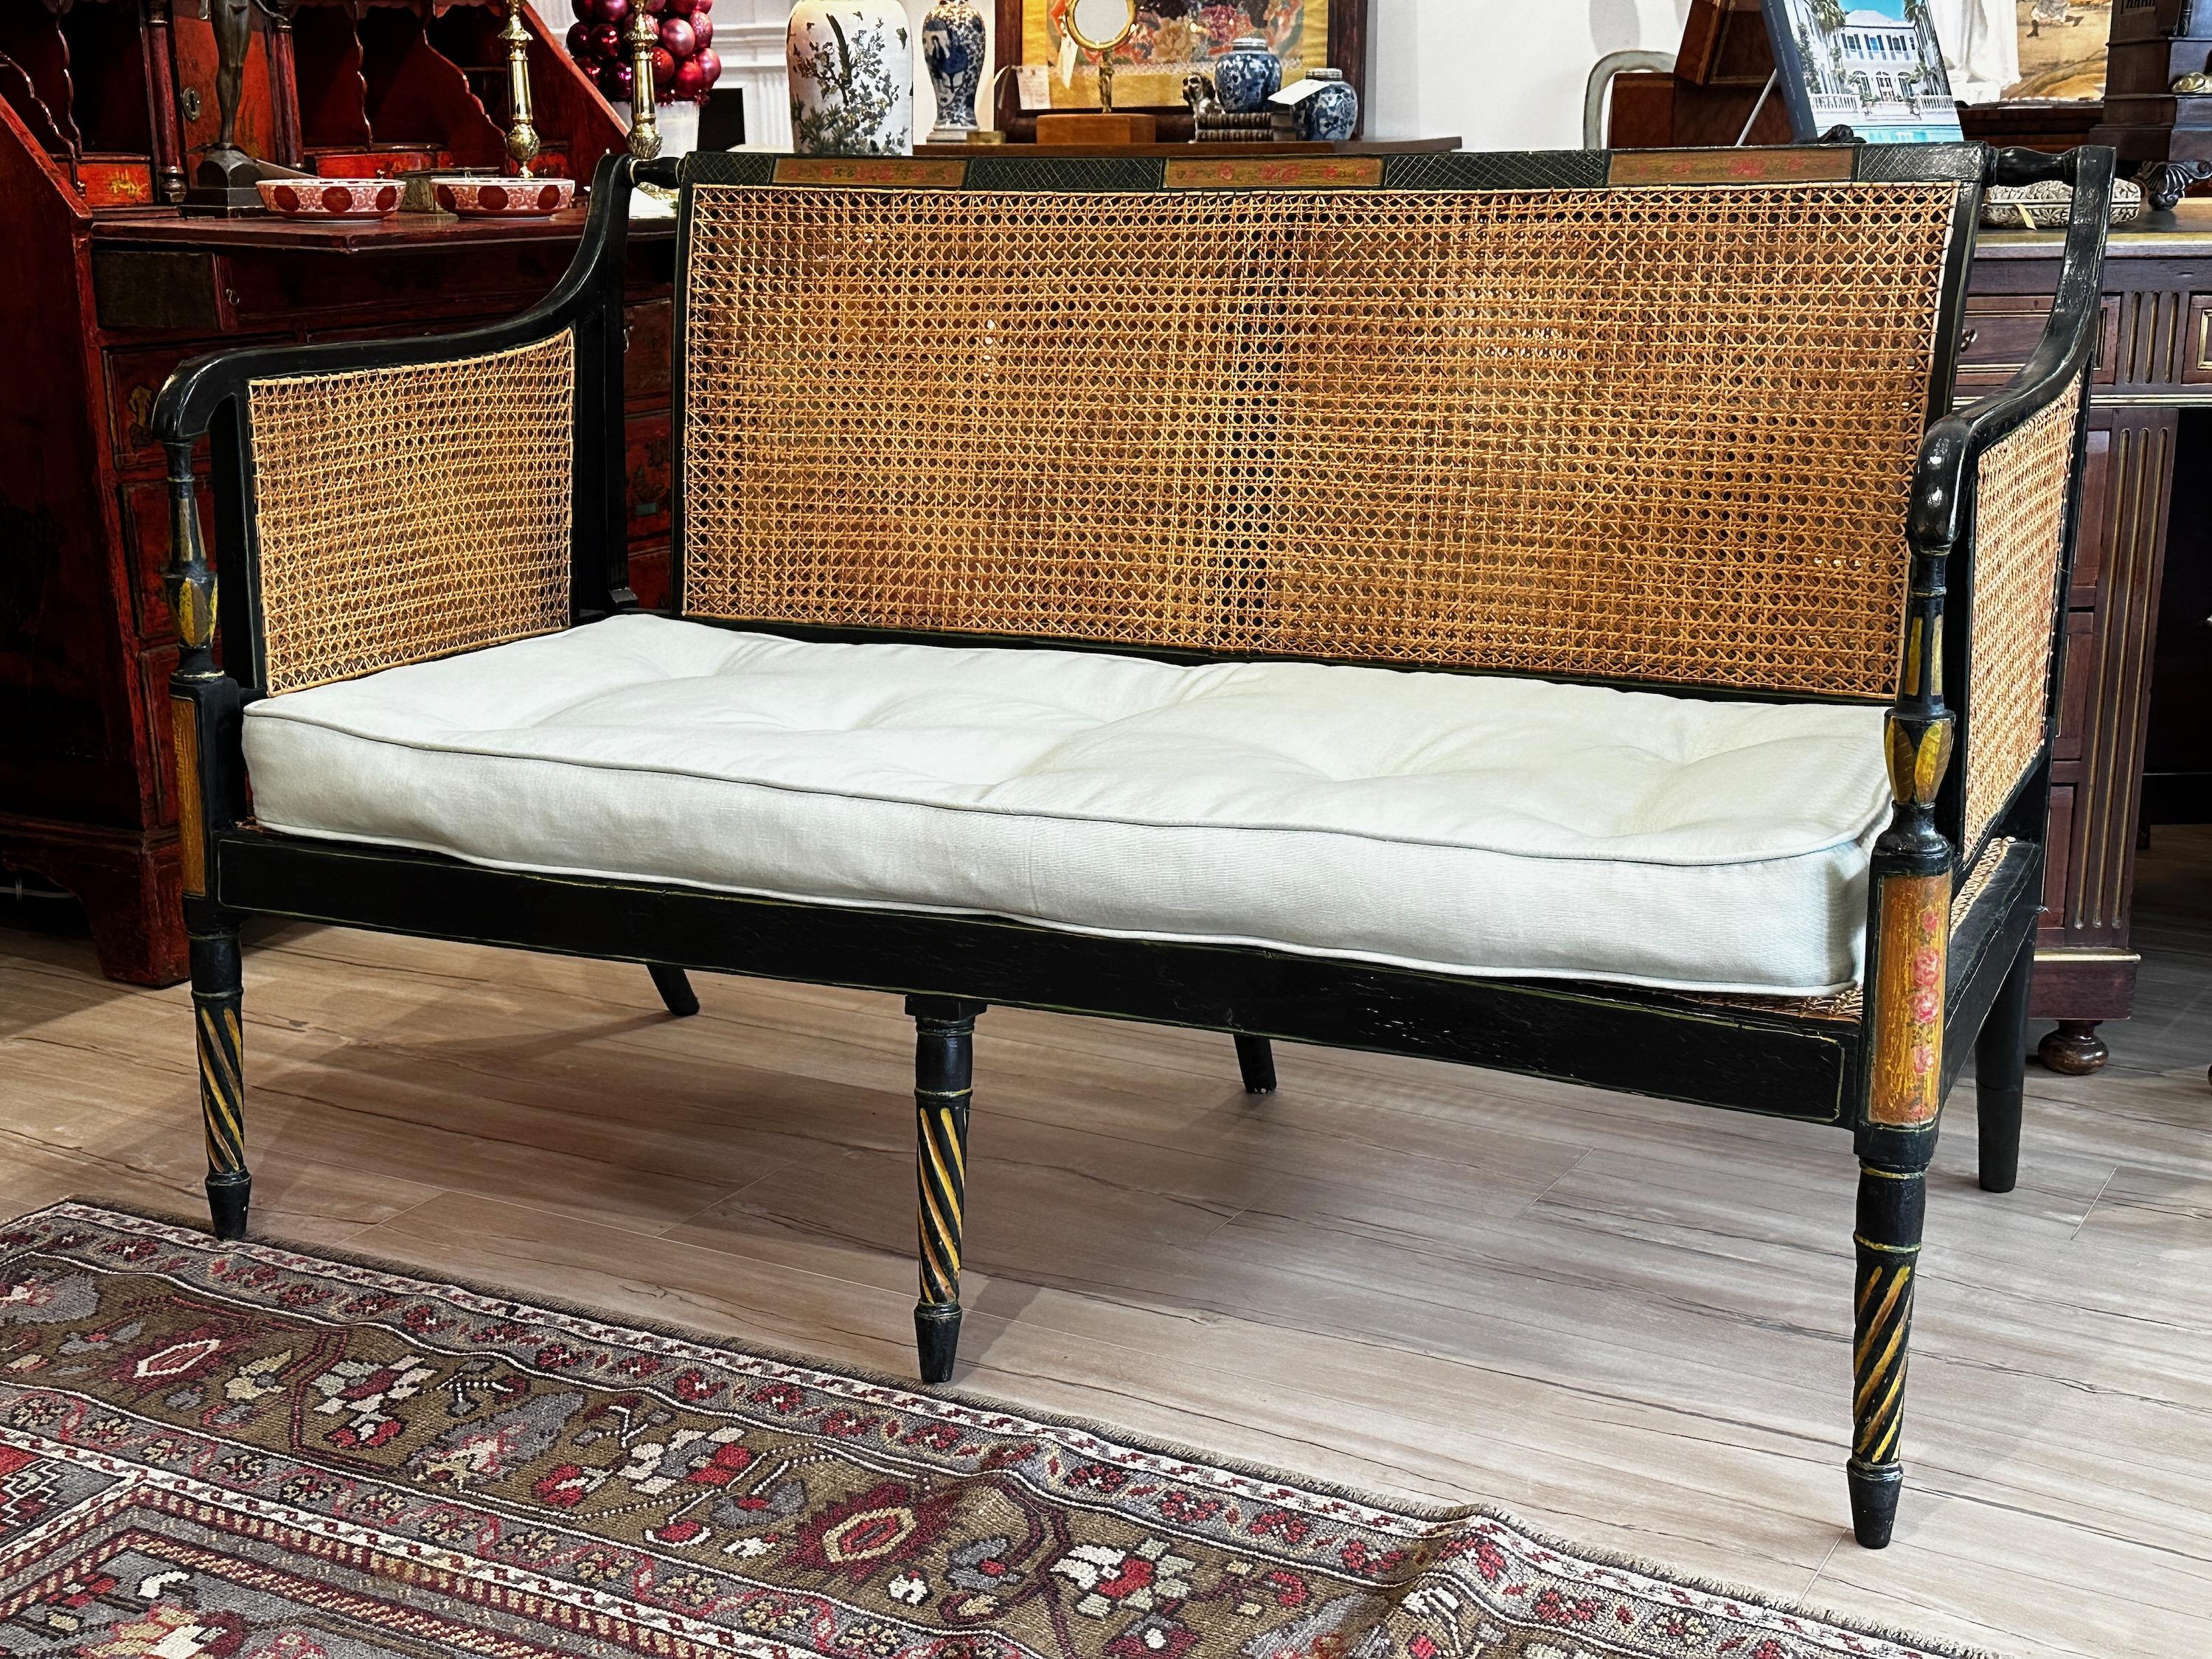 An early 19th century English Regency black lacquer and paint decorated settee or bench, the back, sides, and seat of which are finished with new double-sided hand caning, topped with custom fitted down cushion upholstered in pale blue linen.